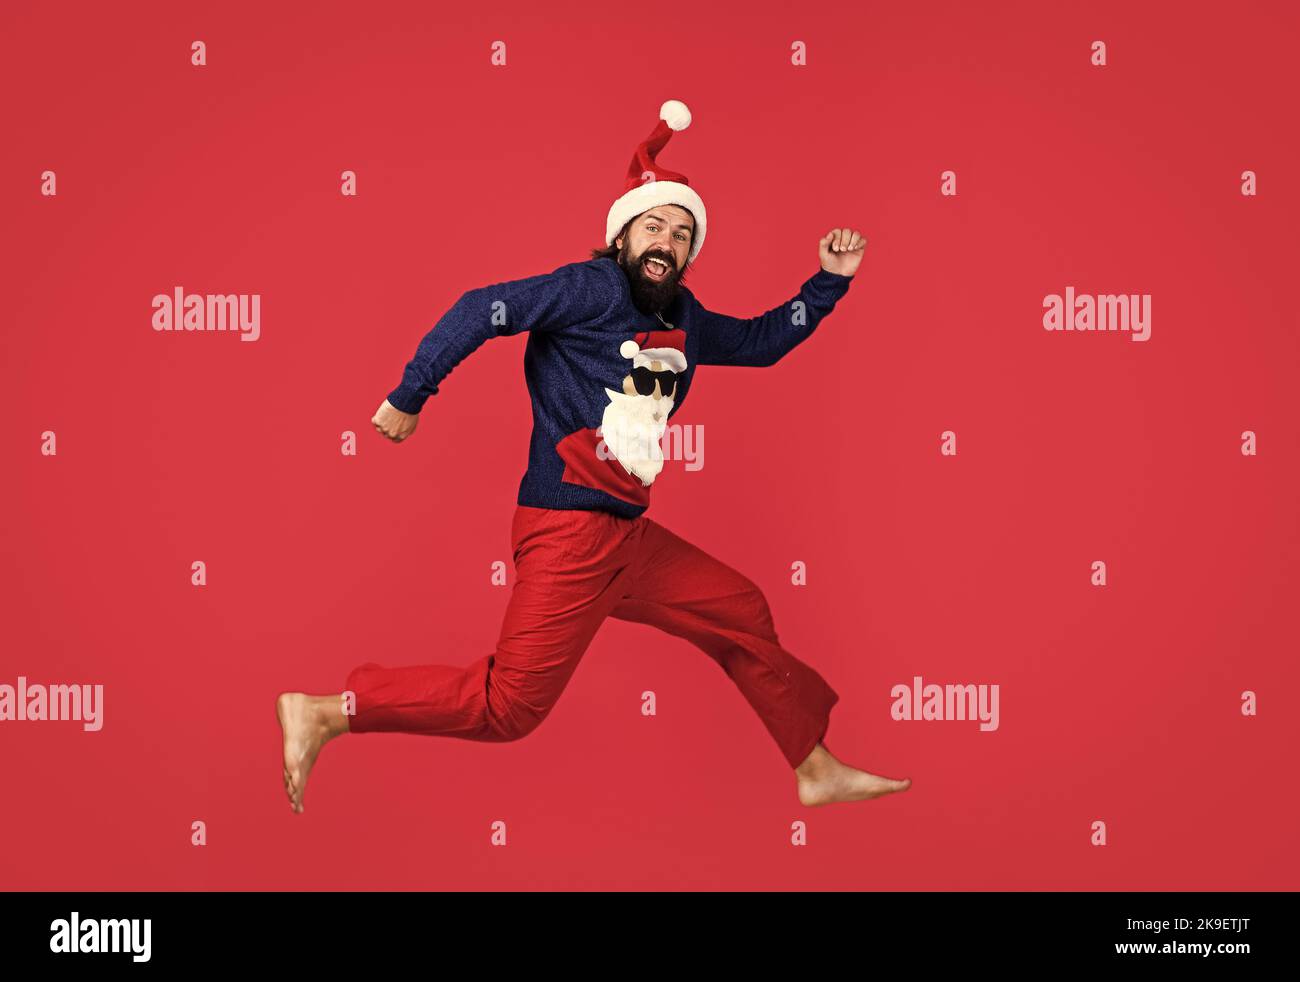 Sports Holiday Running Costumes Athletic Christmas Winter Themed